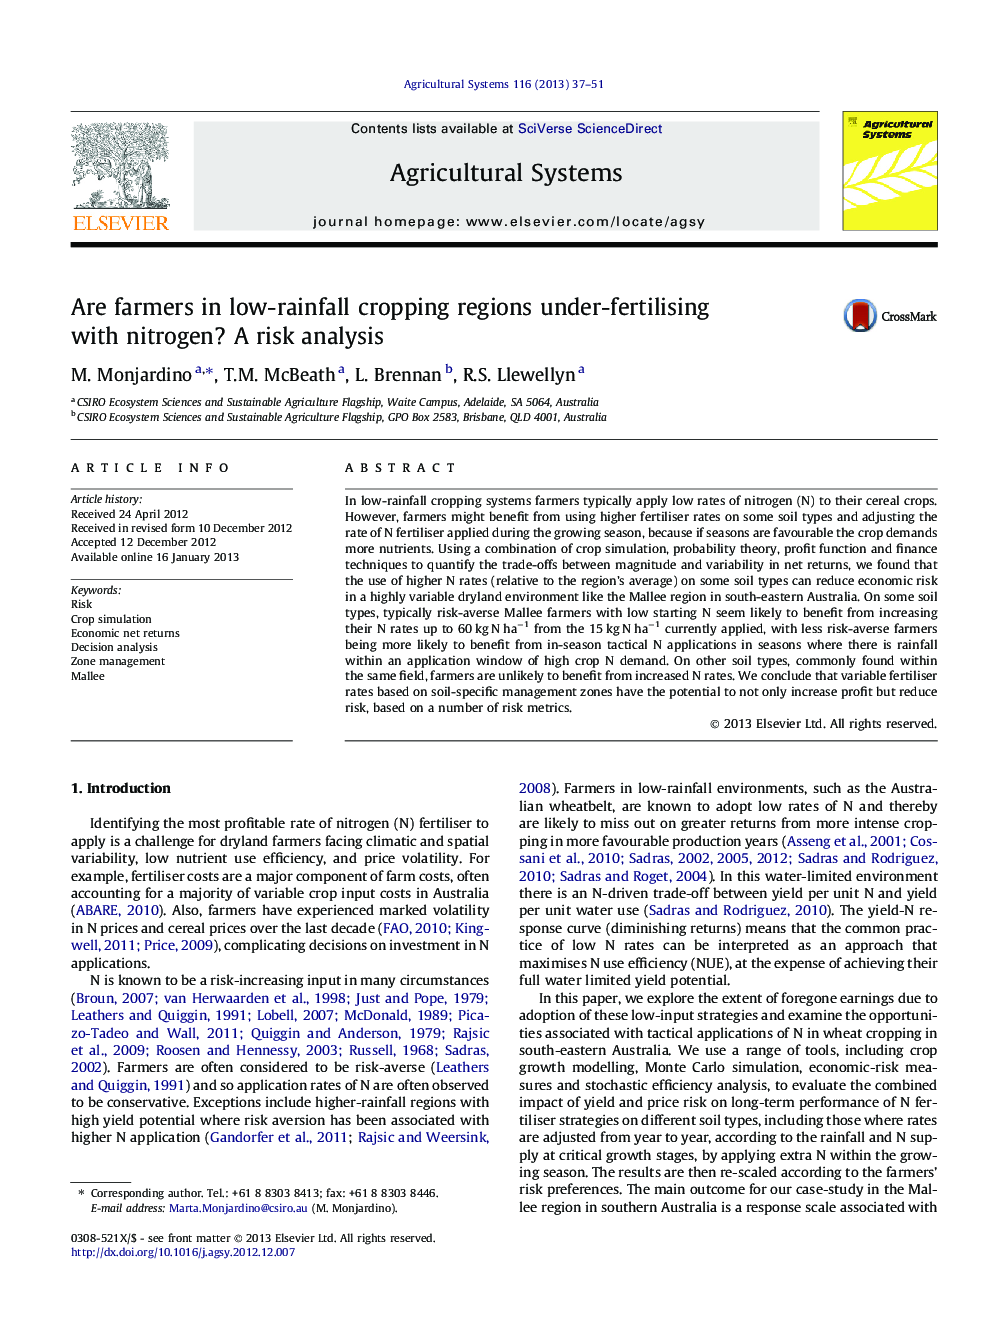 Are farmers in low-rainfall cropping regions under-fertilising with nitrogen? A risk analysis